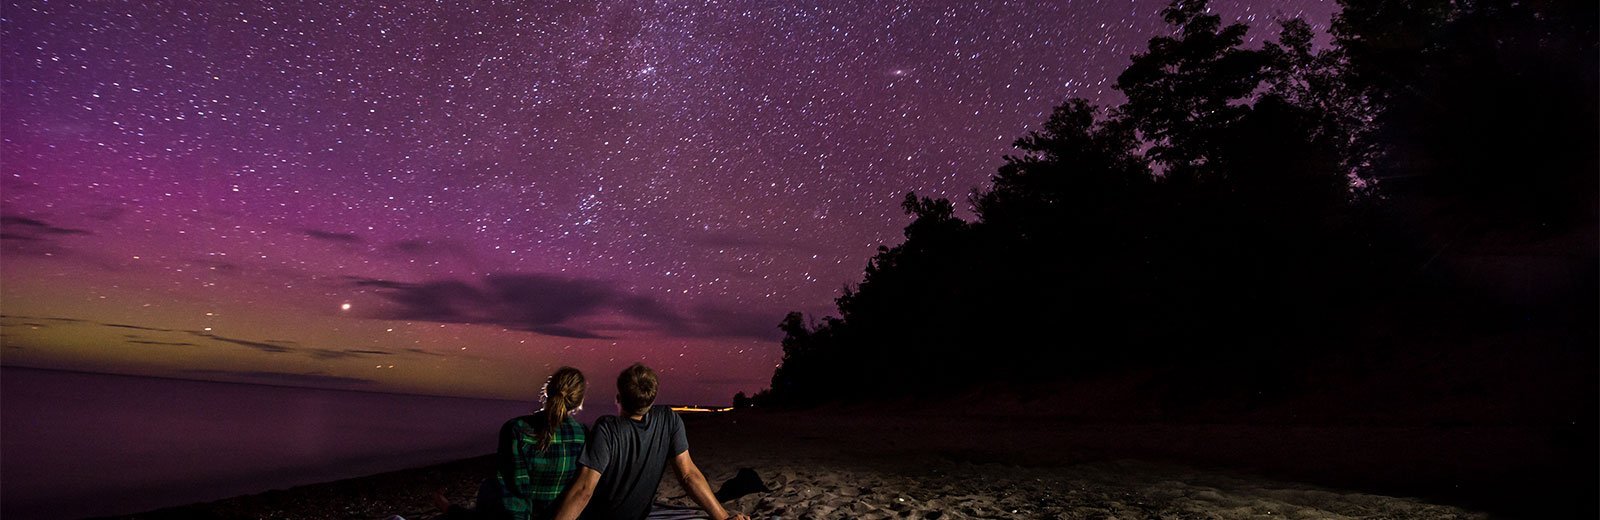 By all measures, it has been an epic summer for Keweenaw stargazers and Aurora spotters. But the best show came on the night of August 12, when the Perseids overlapped with the Delta Aquarids just as the Northern Lights began to bloom. The result? A spectacular night sky radiating violet light and speckled with meteors. Shine on, Keweenaw.